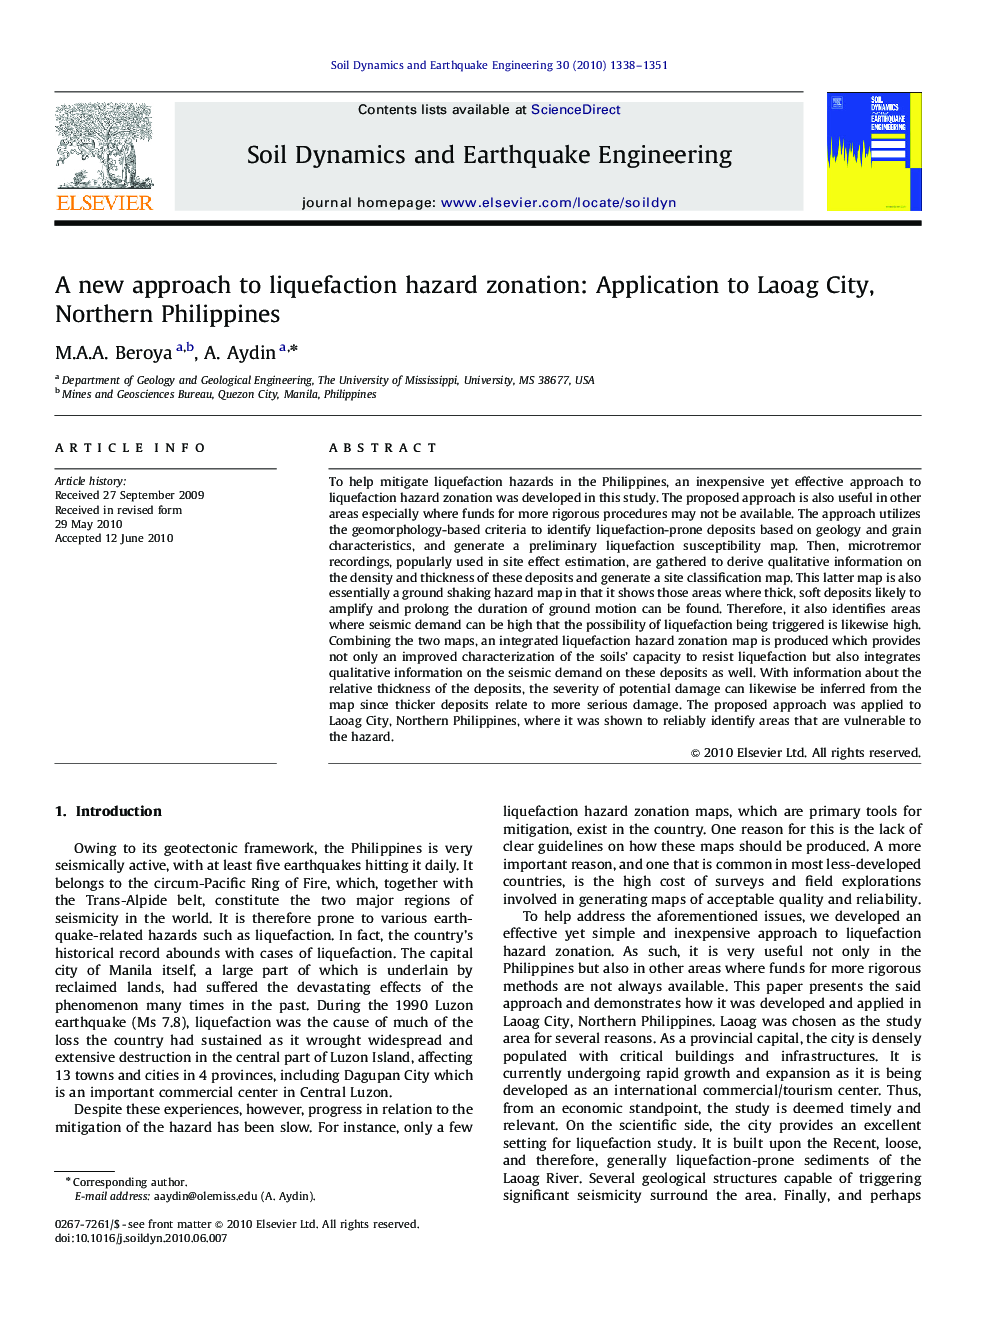 A new approach to liquefaction hazard zonation: Application to Laoag City, Northern Philippines